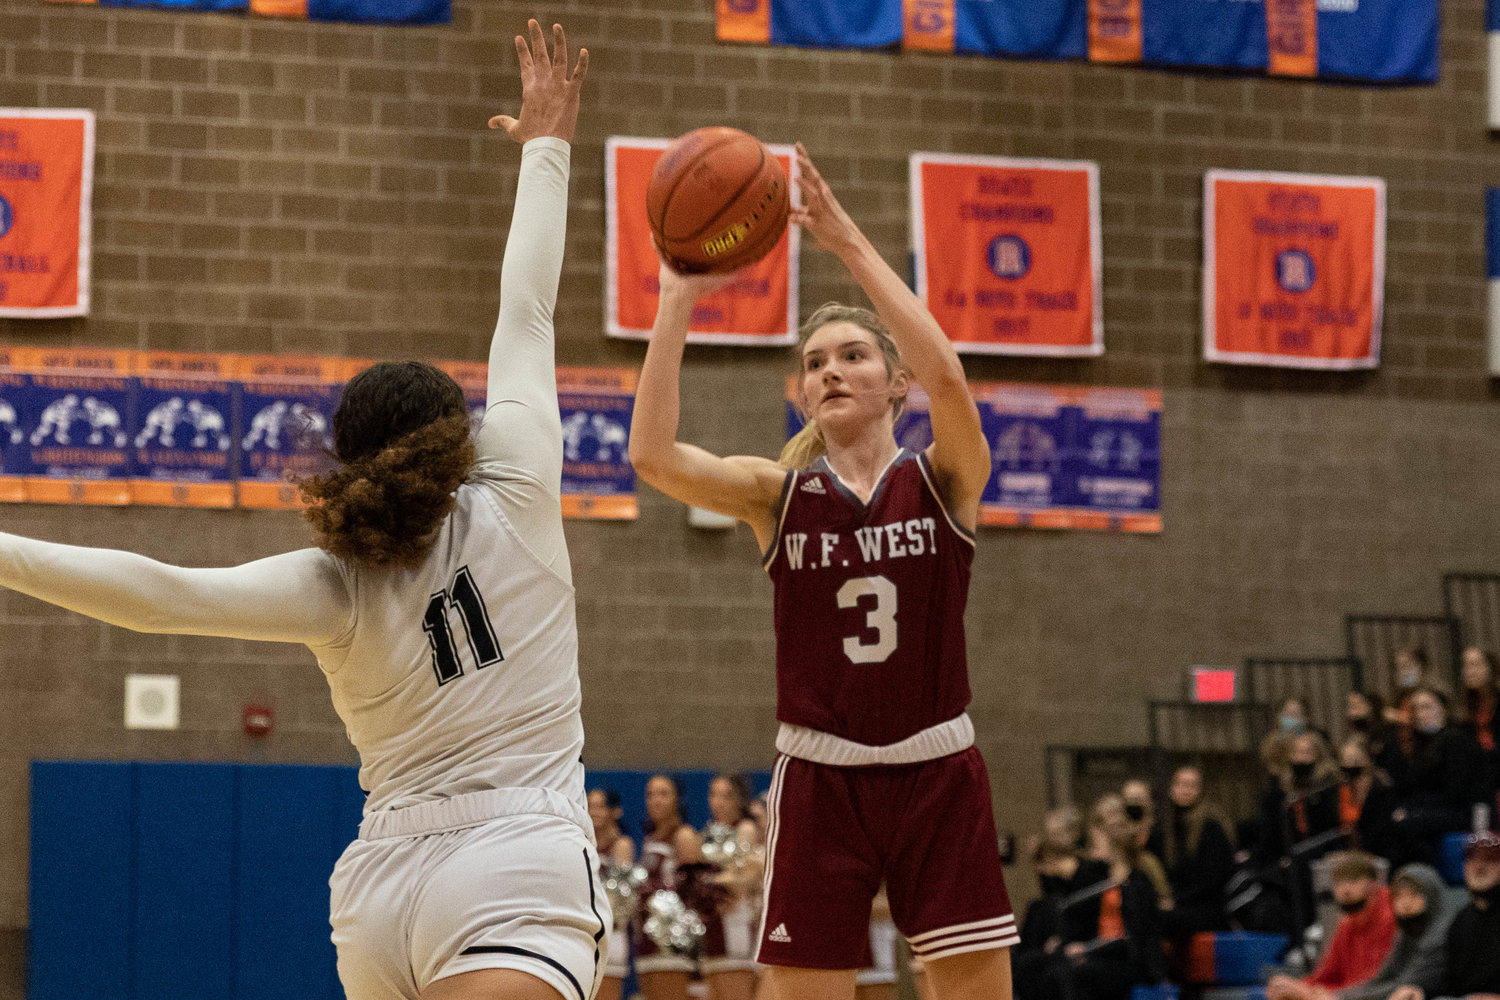 W.F. West forward Lexi Roberts takes a 3-pointer against Hudson's Bay in the 2A District IV semifinals at Ridgefield Feb. 14.